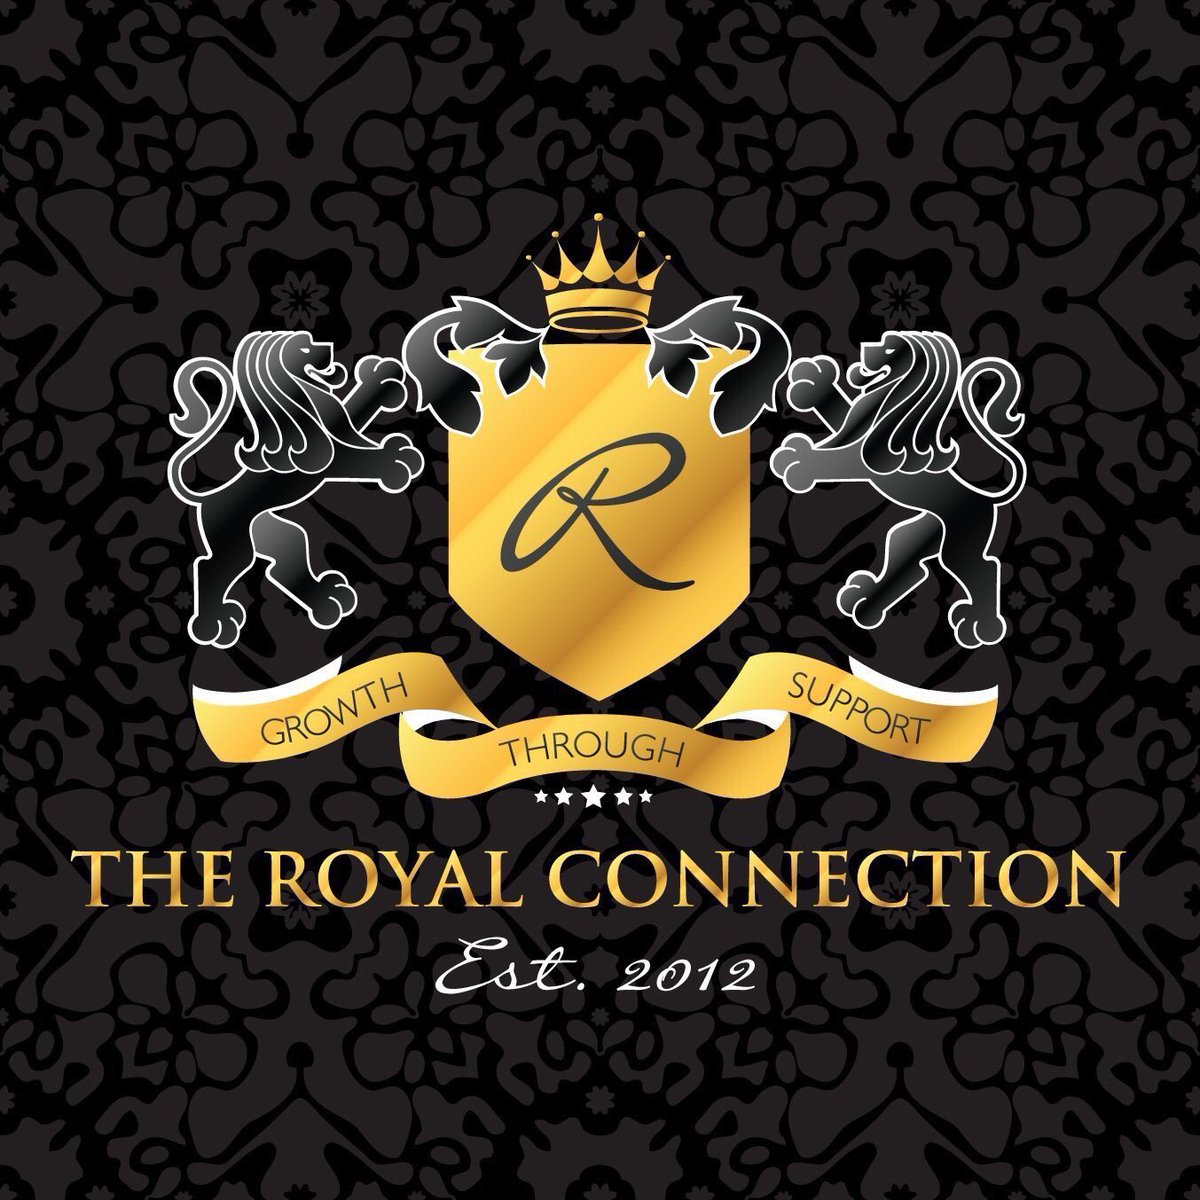 Explore the possibilities as a #smallbusiness with theroyalconnection.co.uk and discover what’s on offer from #QueenOf, #KingOf and #MonarchOf winners in #Stockport 😊 #Male #Entrepreneur #FemaleEntrepreneur #LGBTQ